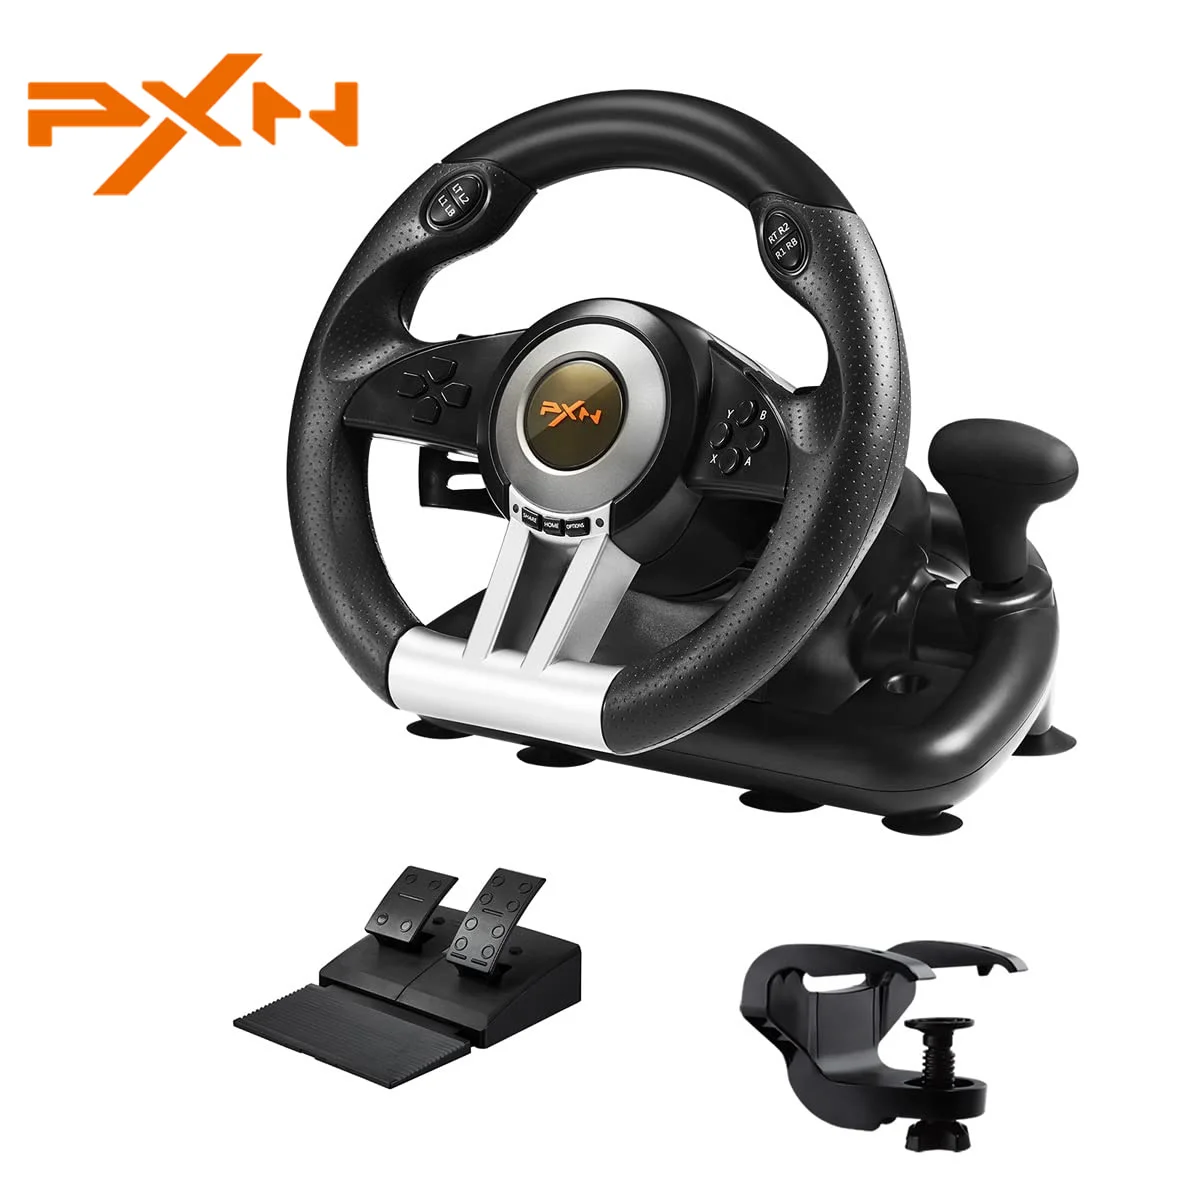 PXN V3 Pro Gaming Racing Wheel Volante PC Steering Wheel Racing Game 180° for PS3/PS4/Xbox One/Nintendo Switch/Xbox Series X/S